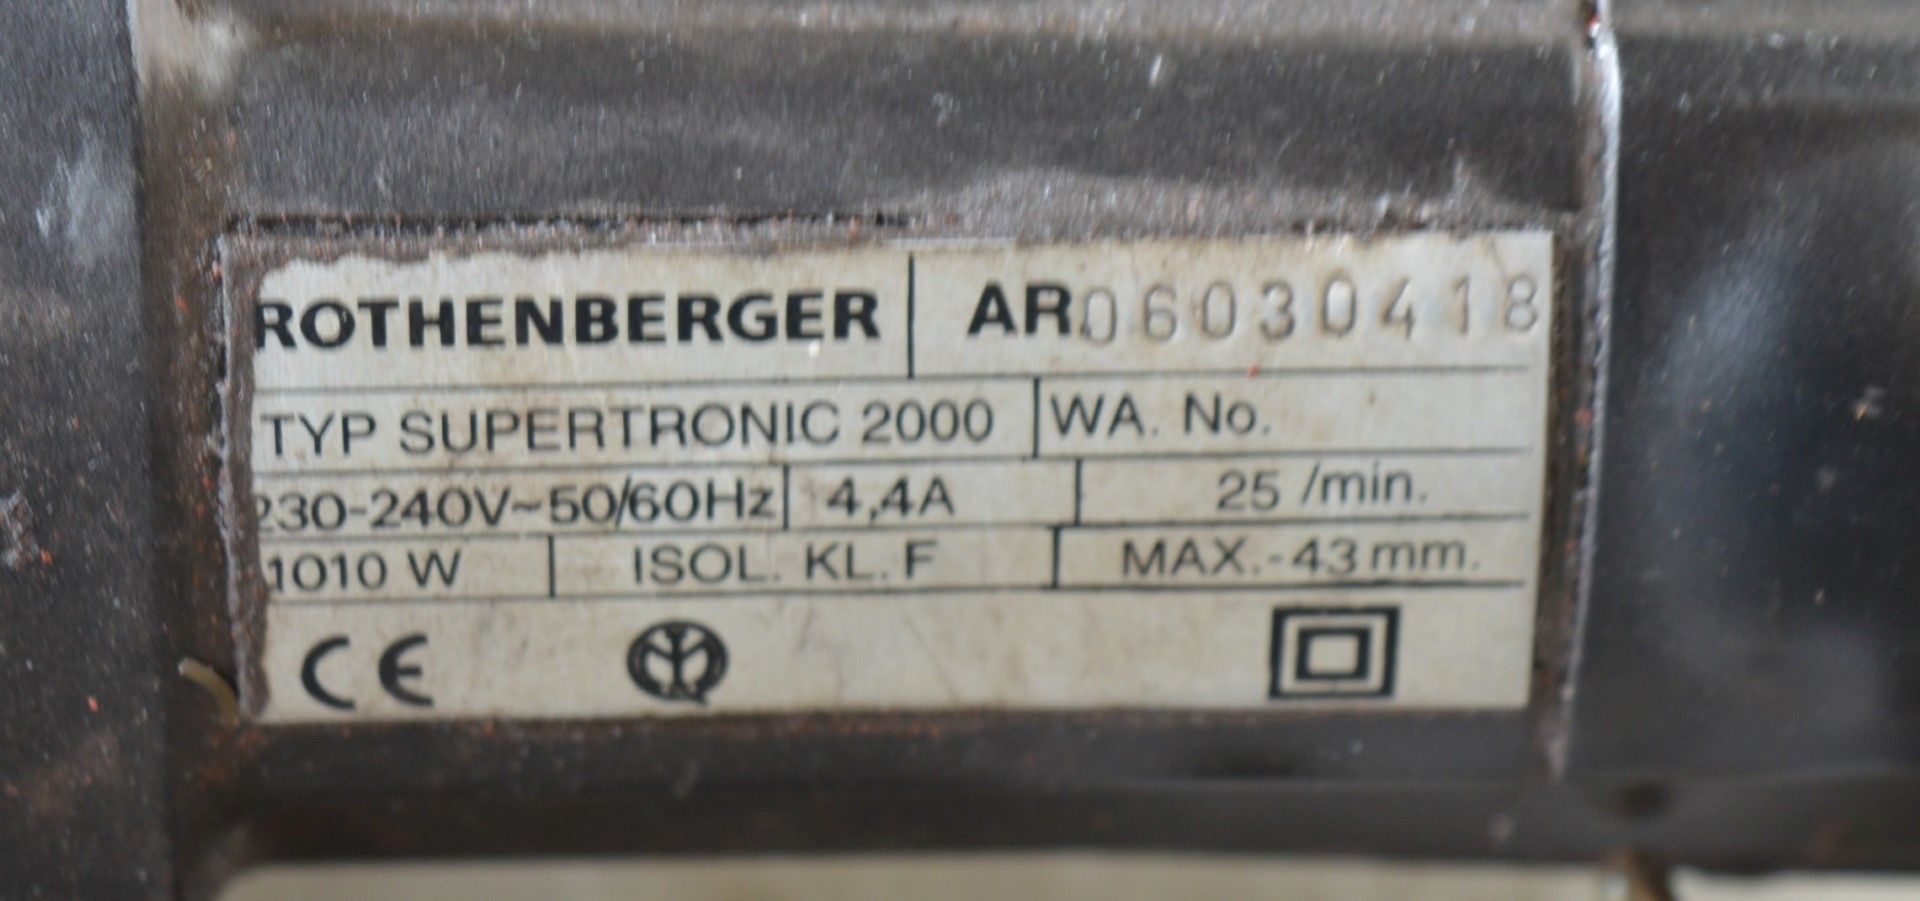 1 x Rothenberger Supertronic 2000 Portable Pipe Threader With Original Case - 240v - CL202 - Ref - Image 4 of 5